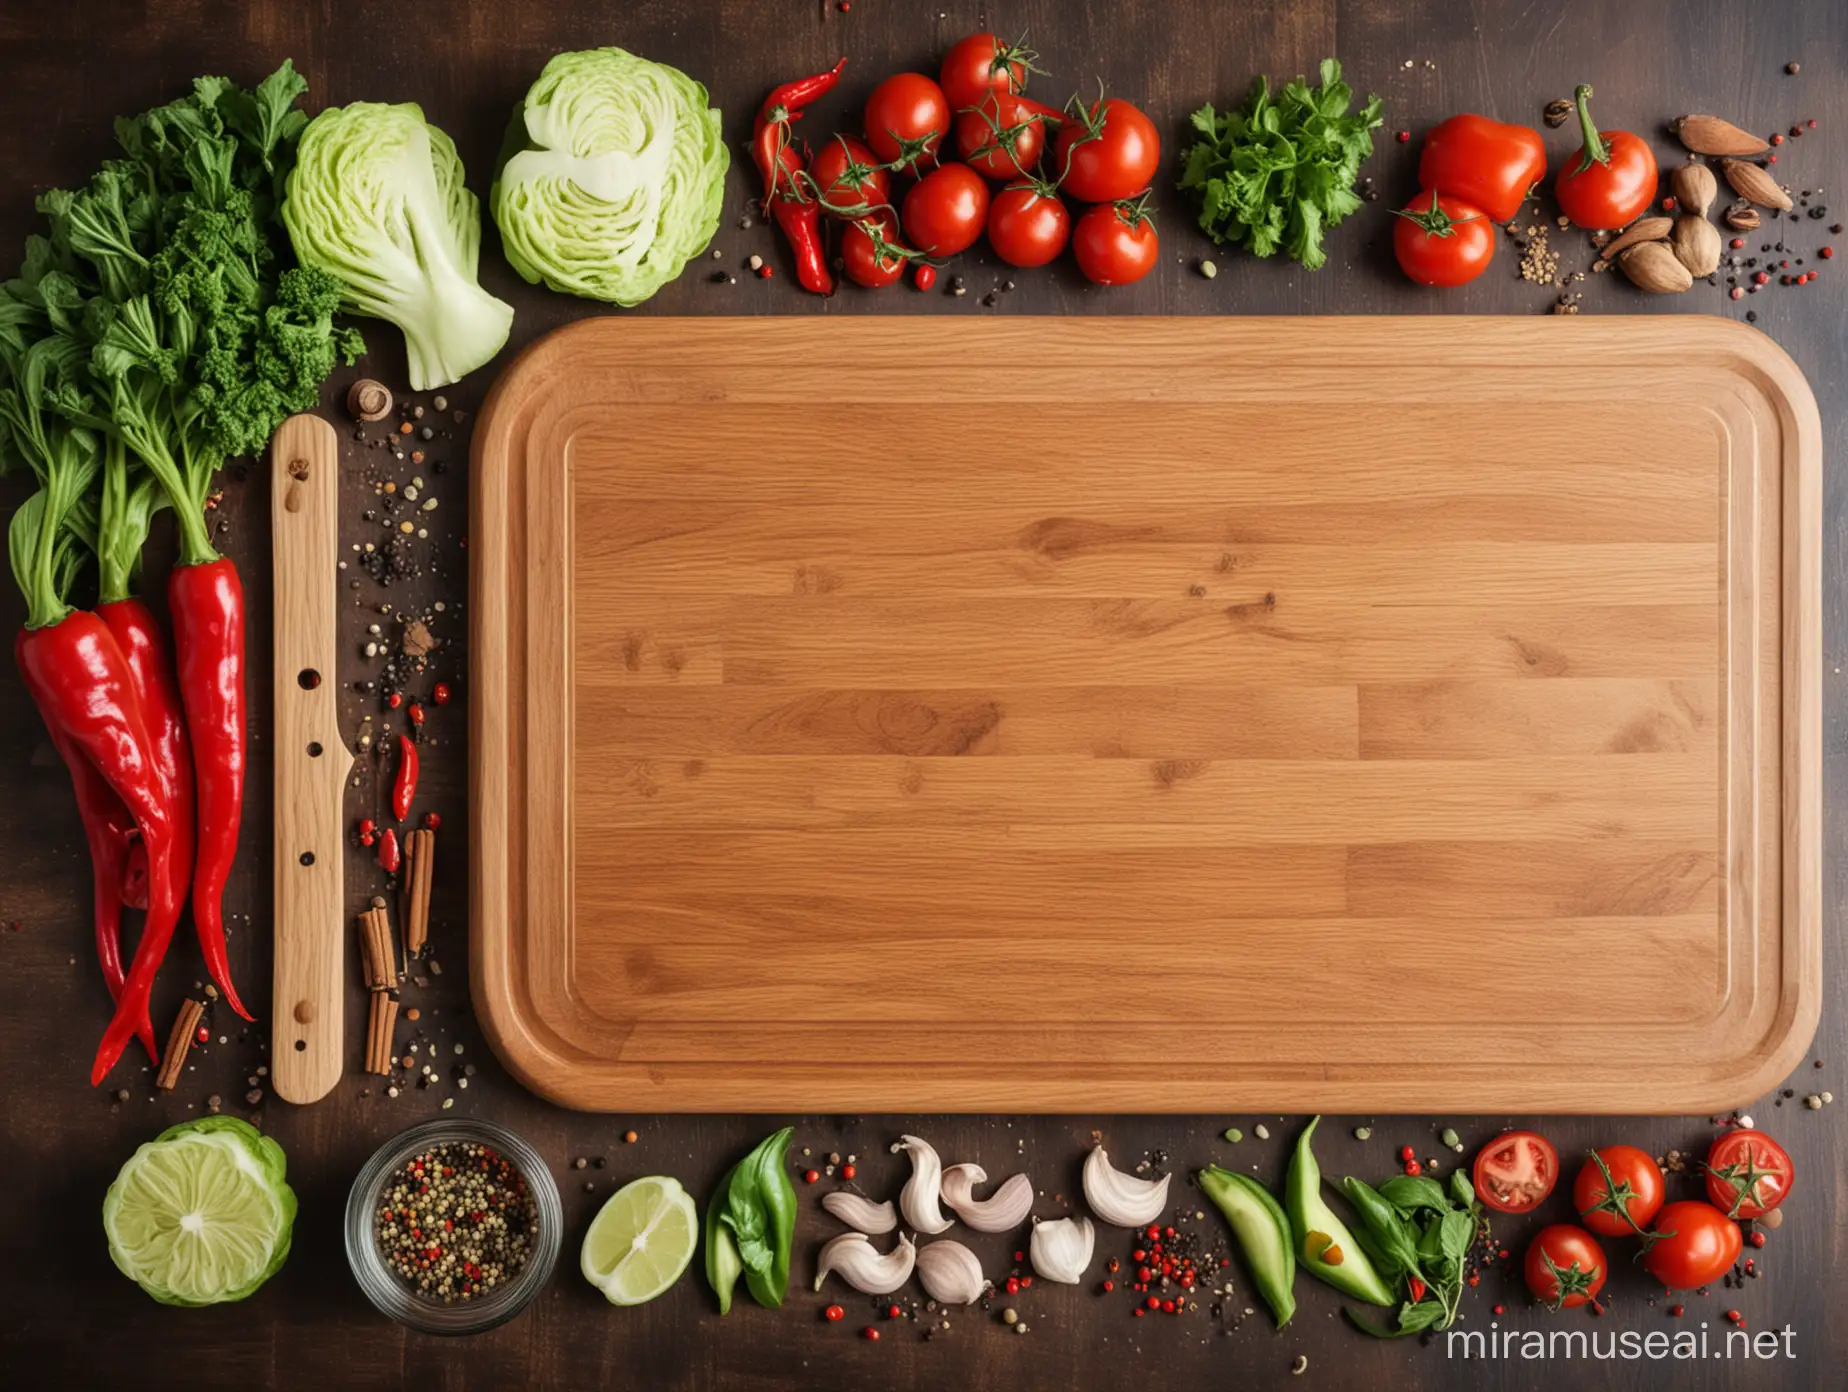 Wooden Chopping Board with Fresh Vegetables and Spices Arrayed Around